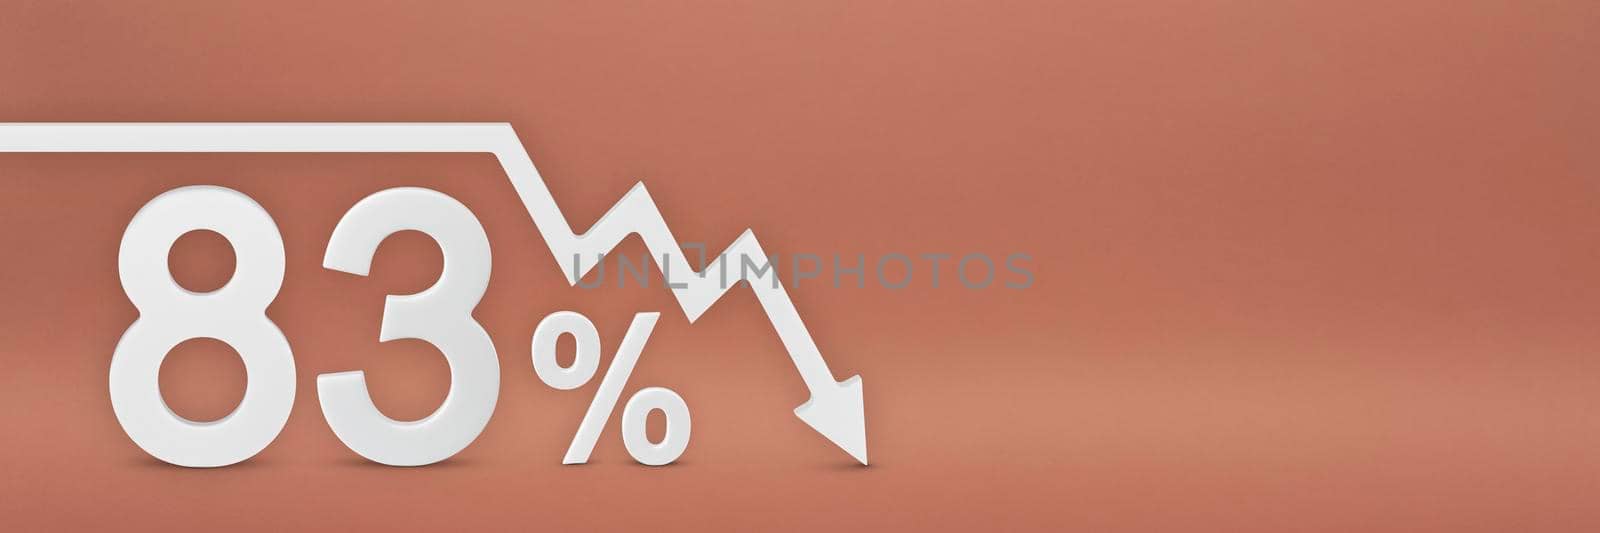 eighty-three percent, the arrow on the graph is pointing down. Stock market crash, bear market, inflation.Economic collapse, collapse of stocks.3d banner,83 percent discount sign on a red background